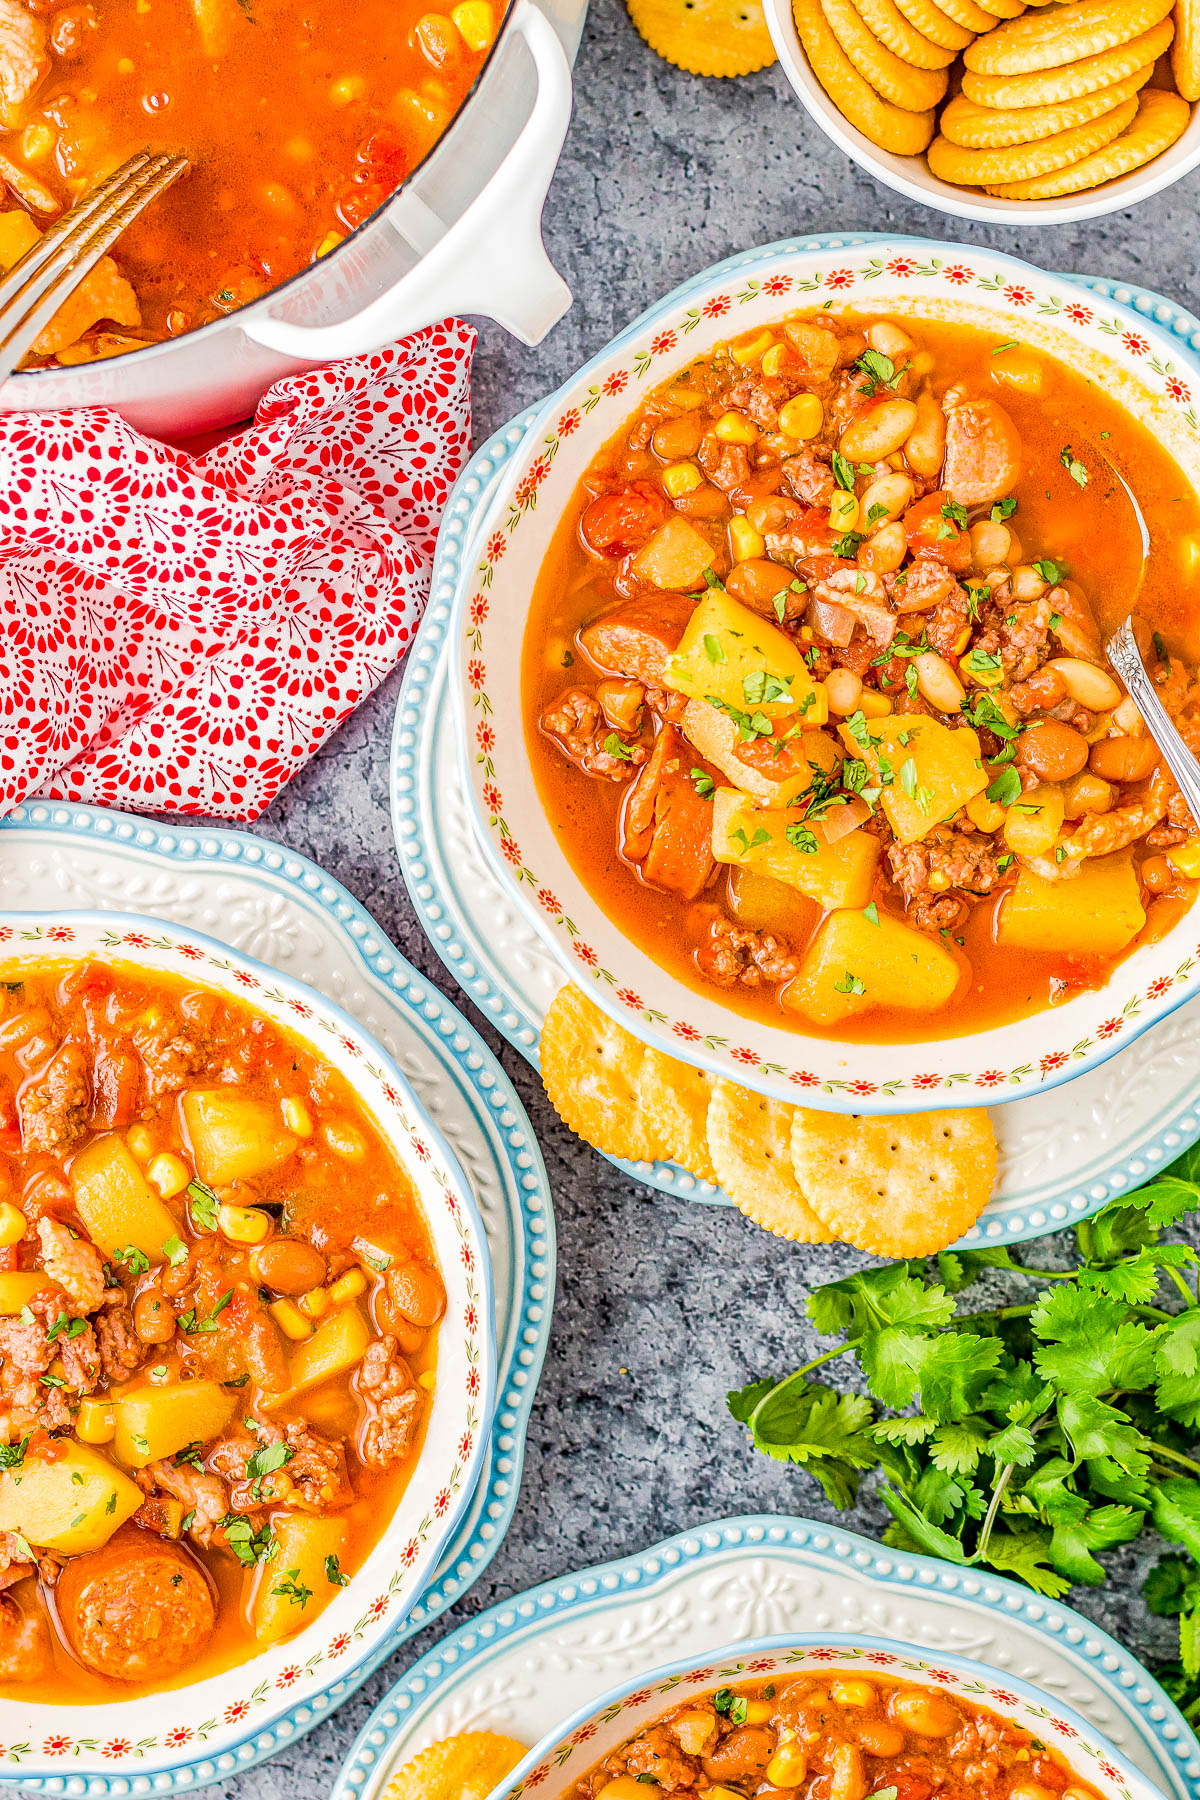 Cowboy Stew - All the cowboys, cowgirls, and meat lovers are going to LOVE this EASY stew recipe with ground beef, bacon, and sausage! There are also beans, potatoes, and corn simmered in a flavorful chili powder, smoked paprika, and cumin broth. Ready in 45 minutes, this is pure hearty comfort food that the whole family will enjoy! 